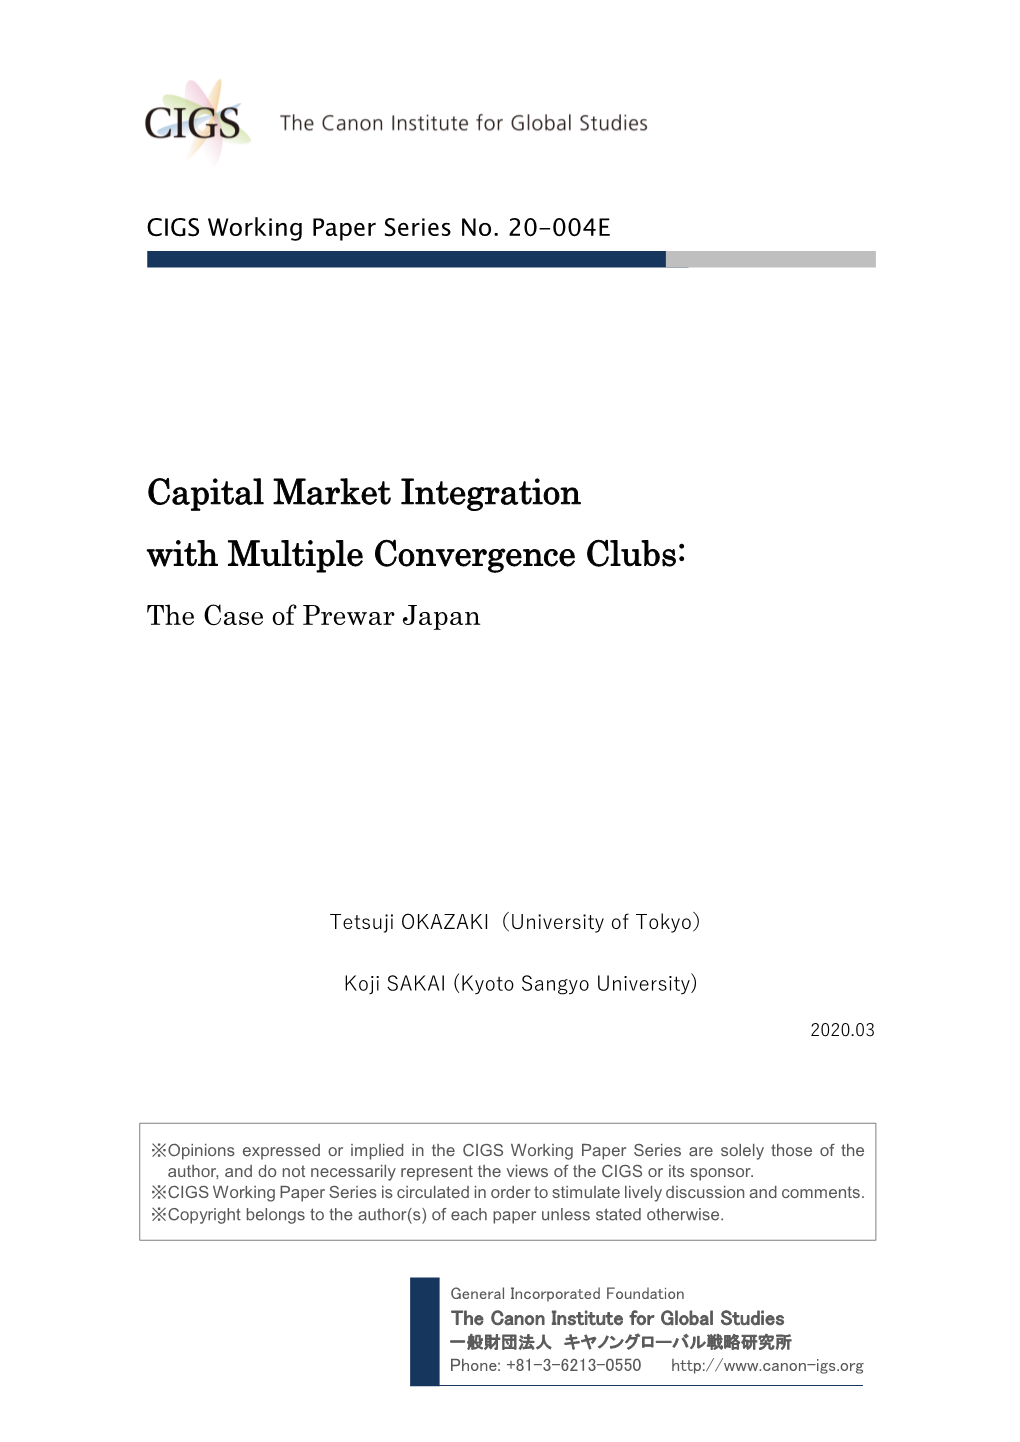 Capital Market Integration with Multiple Convergence Clubs